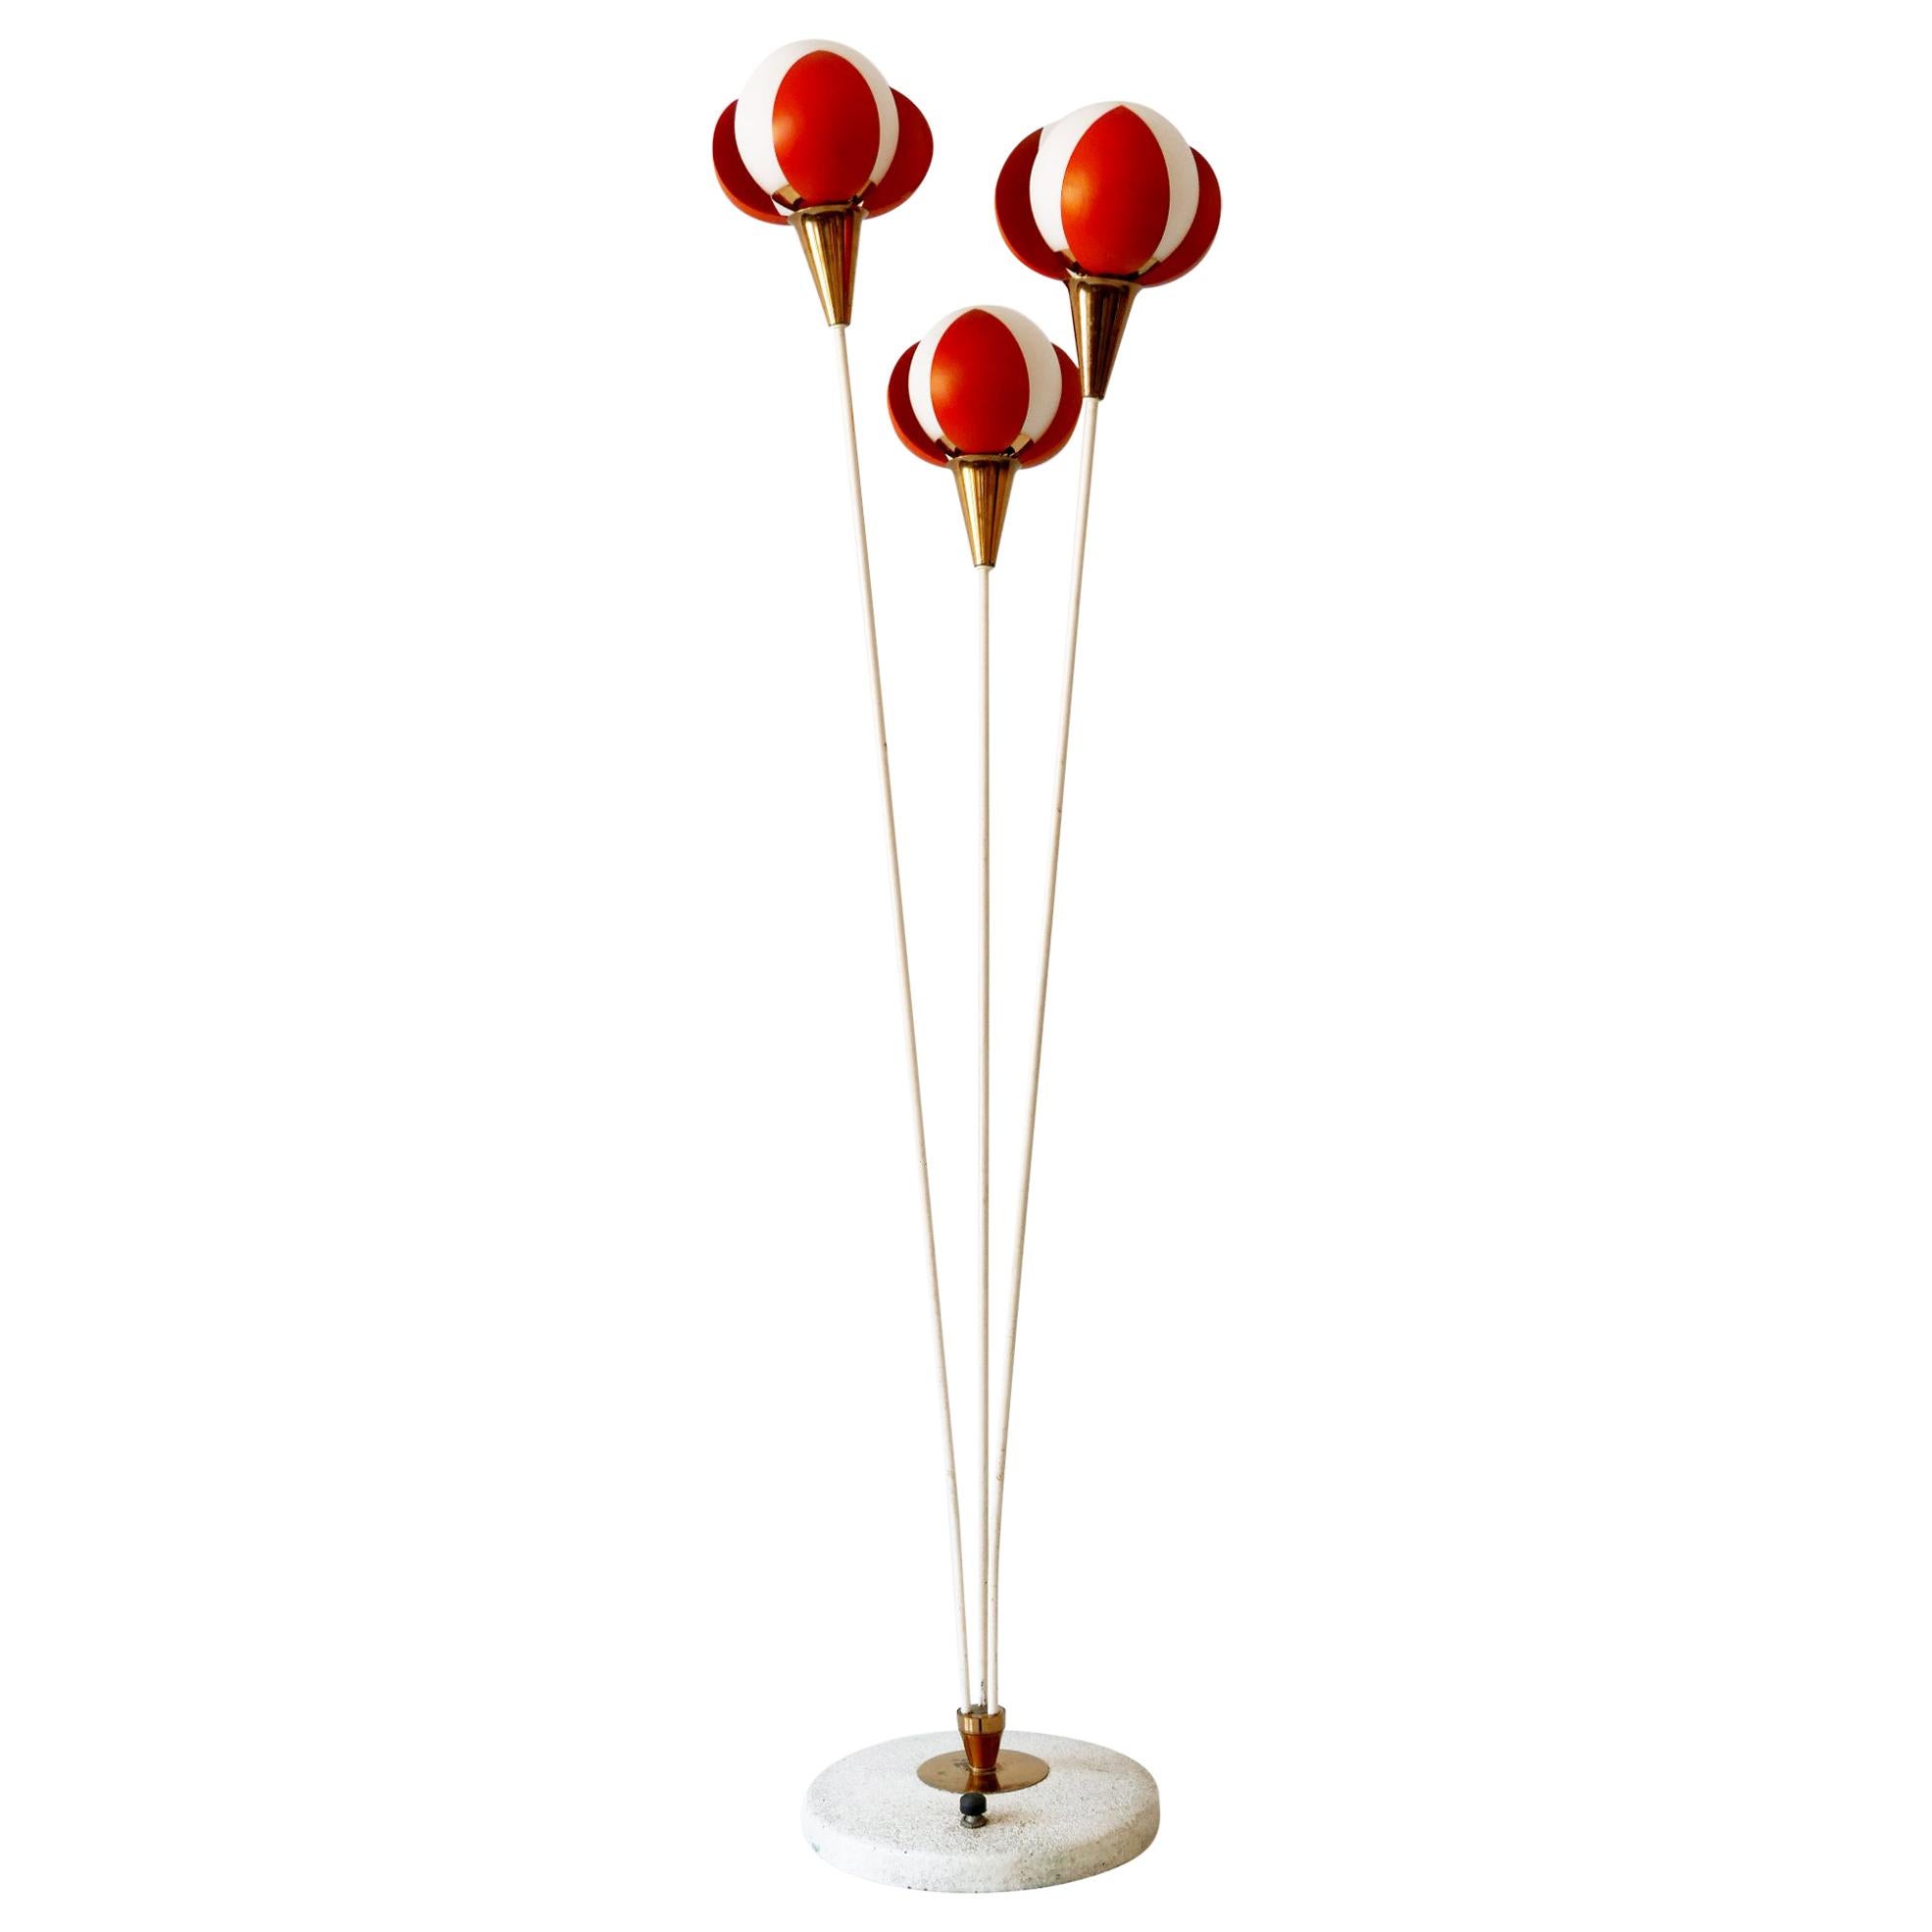 Amazing Mid-Century Modern Three-Flamed Floor Lamp Buds, 1950s, France For Sale